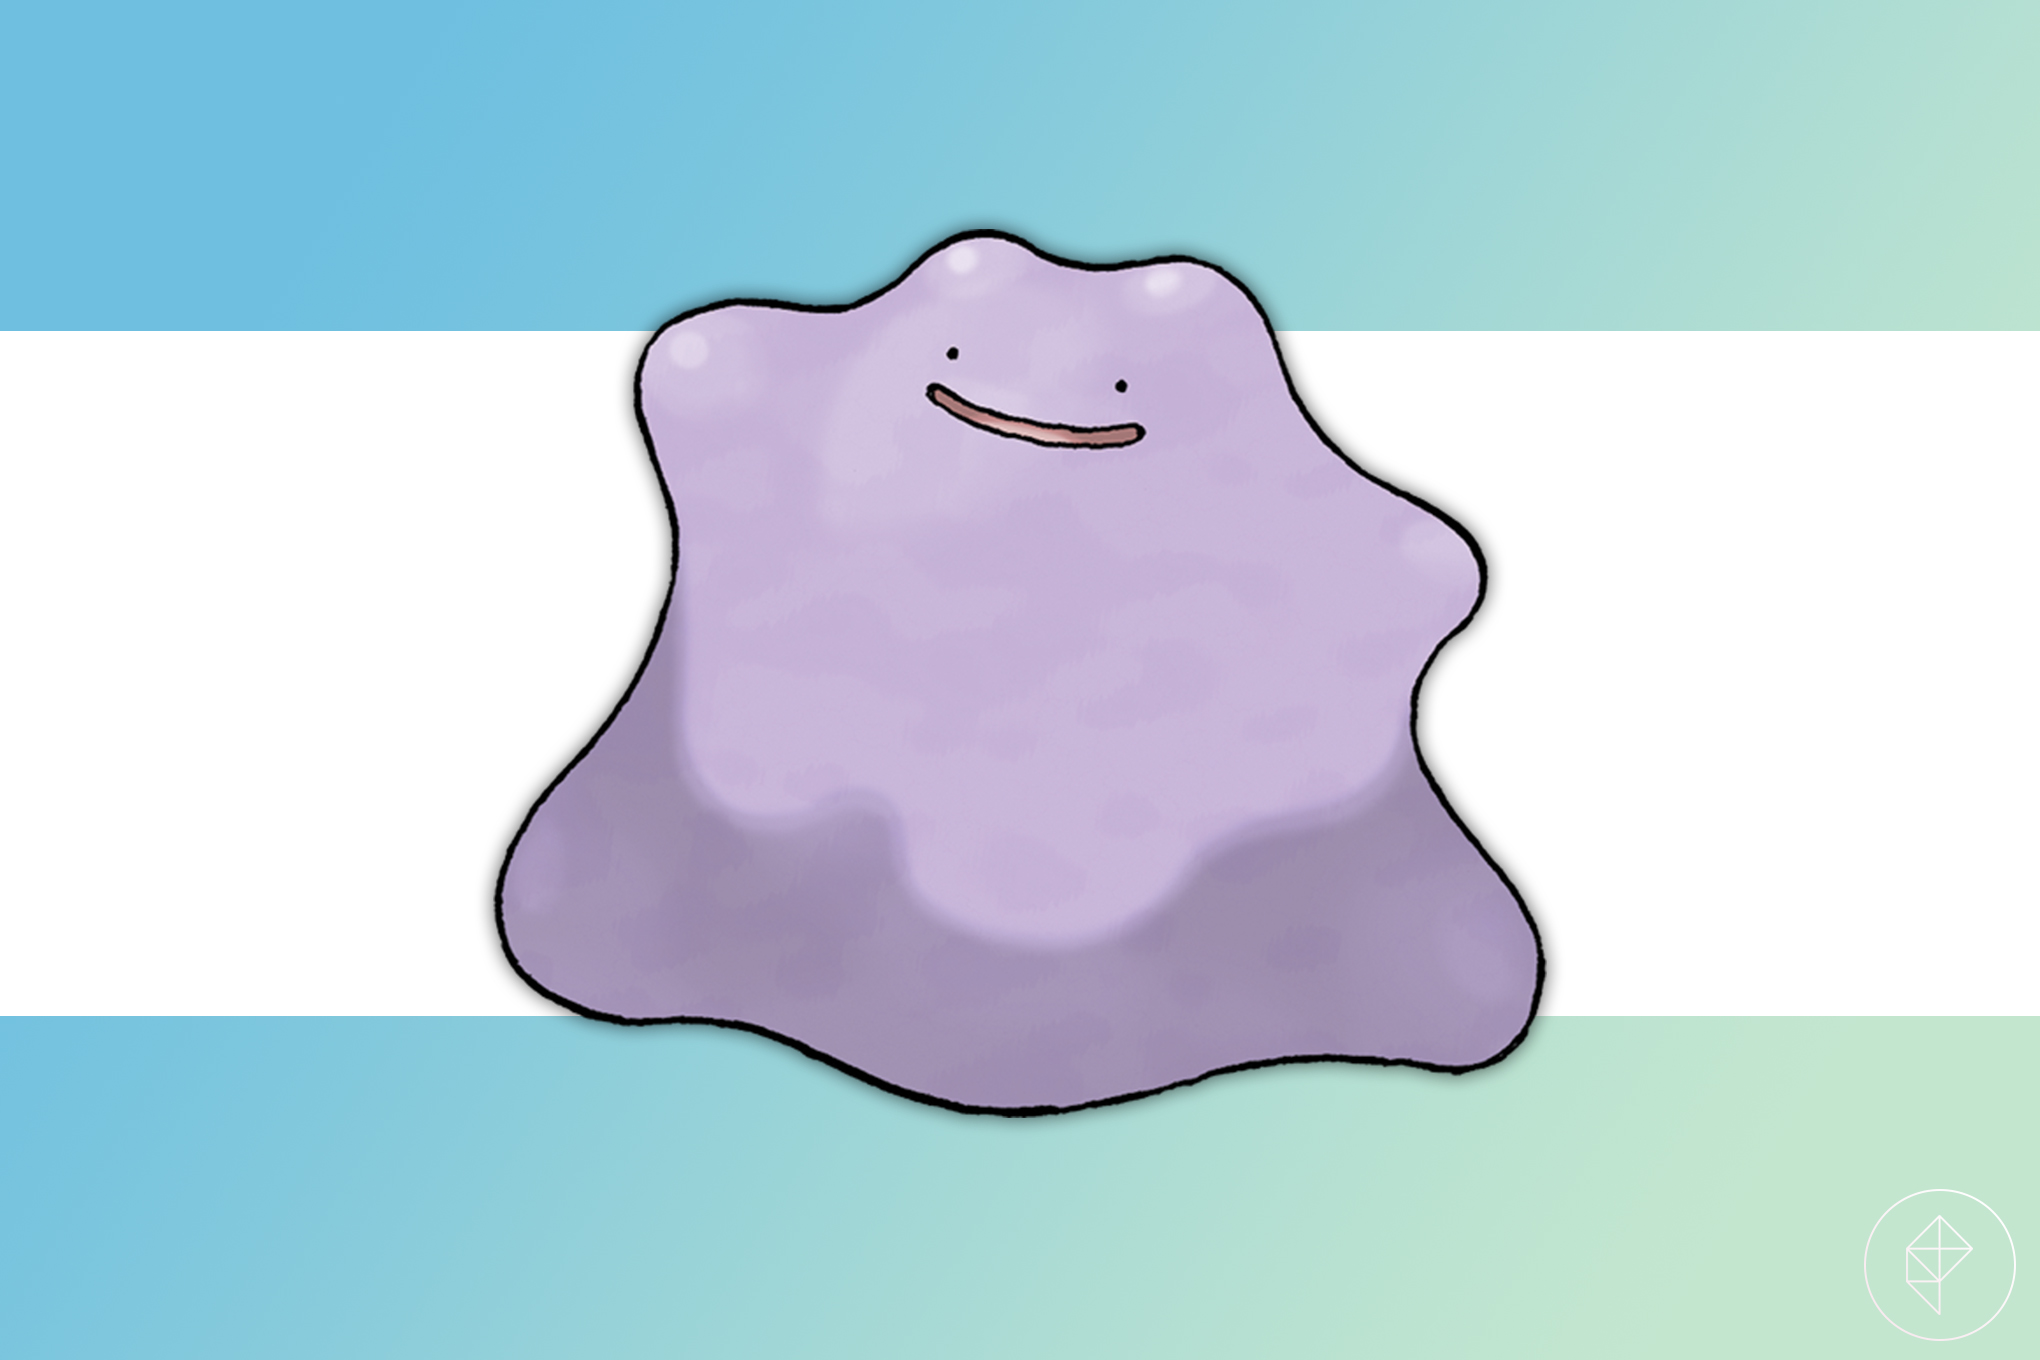 Ditto over a blue and green gradient